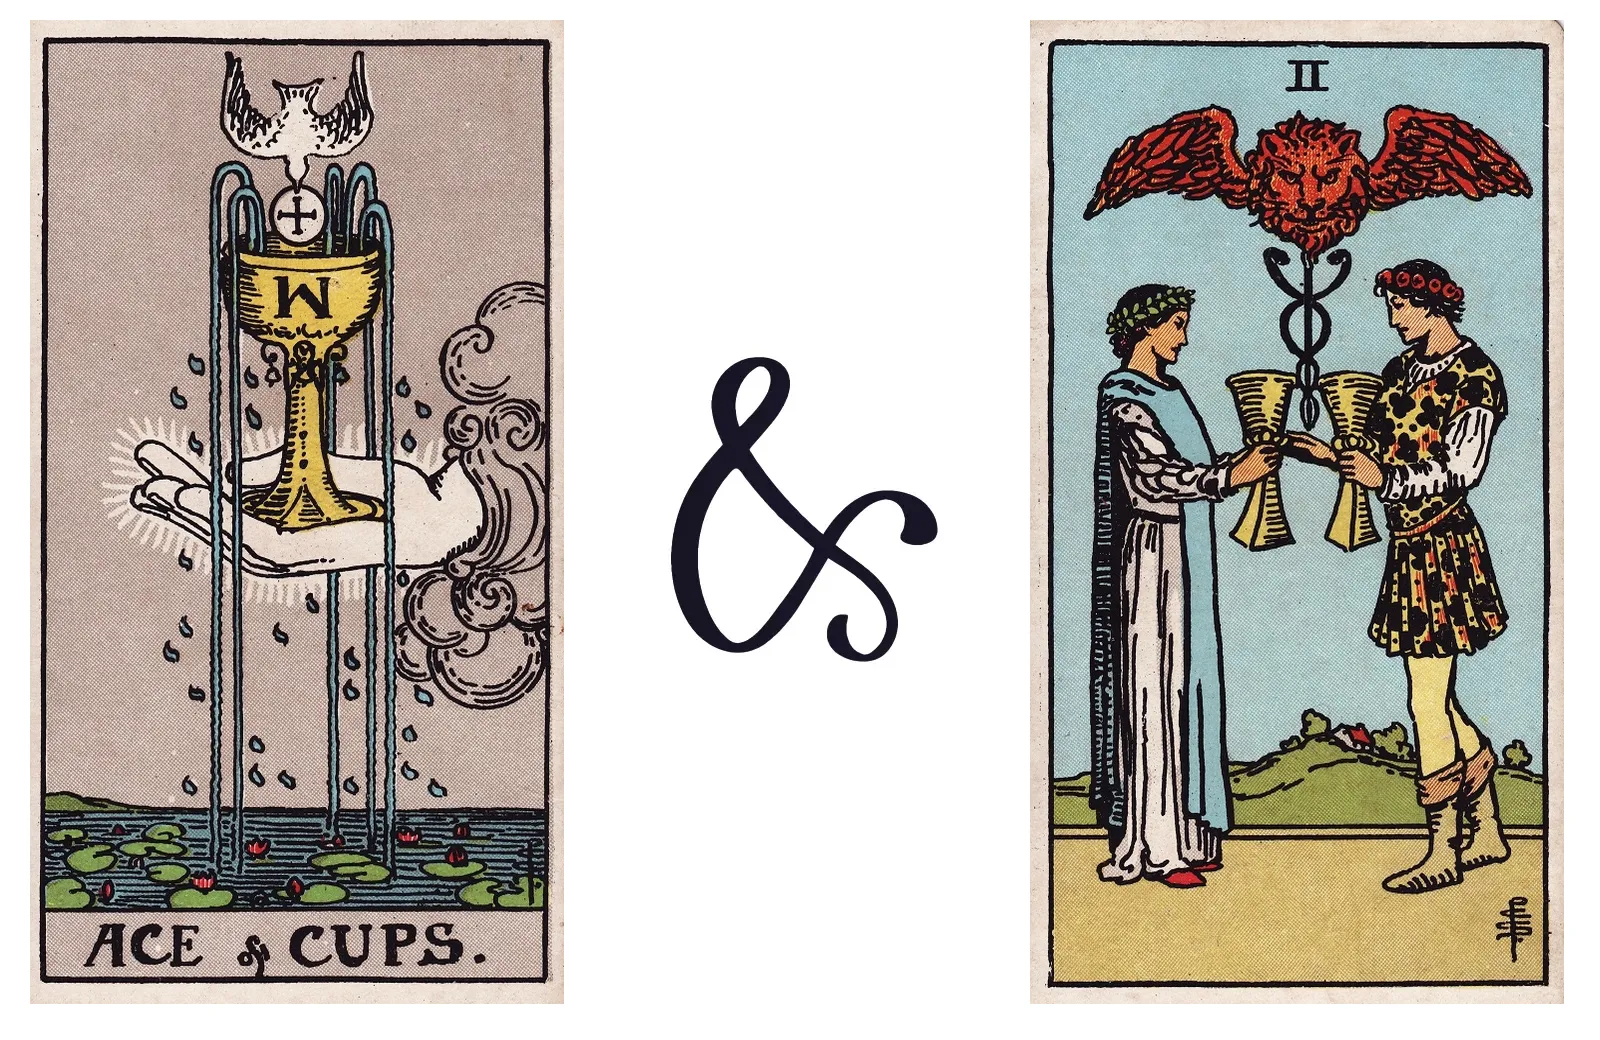 Ace of Cups and Two of Cups